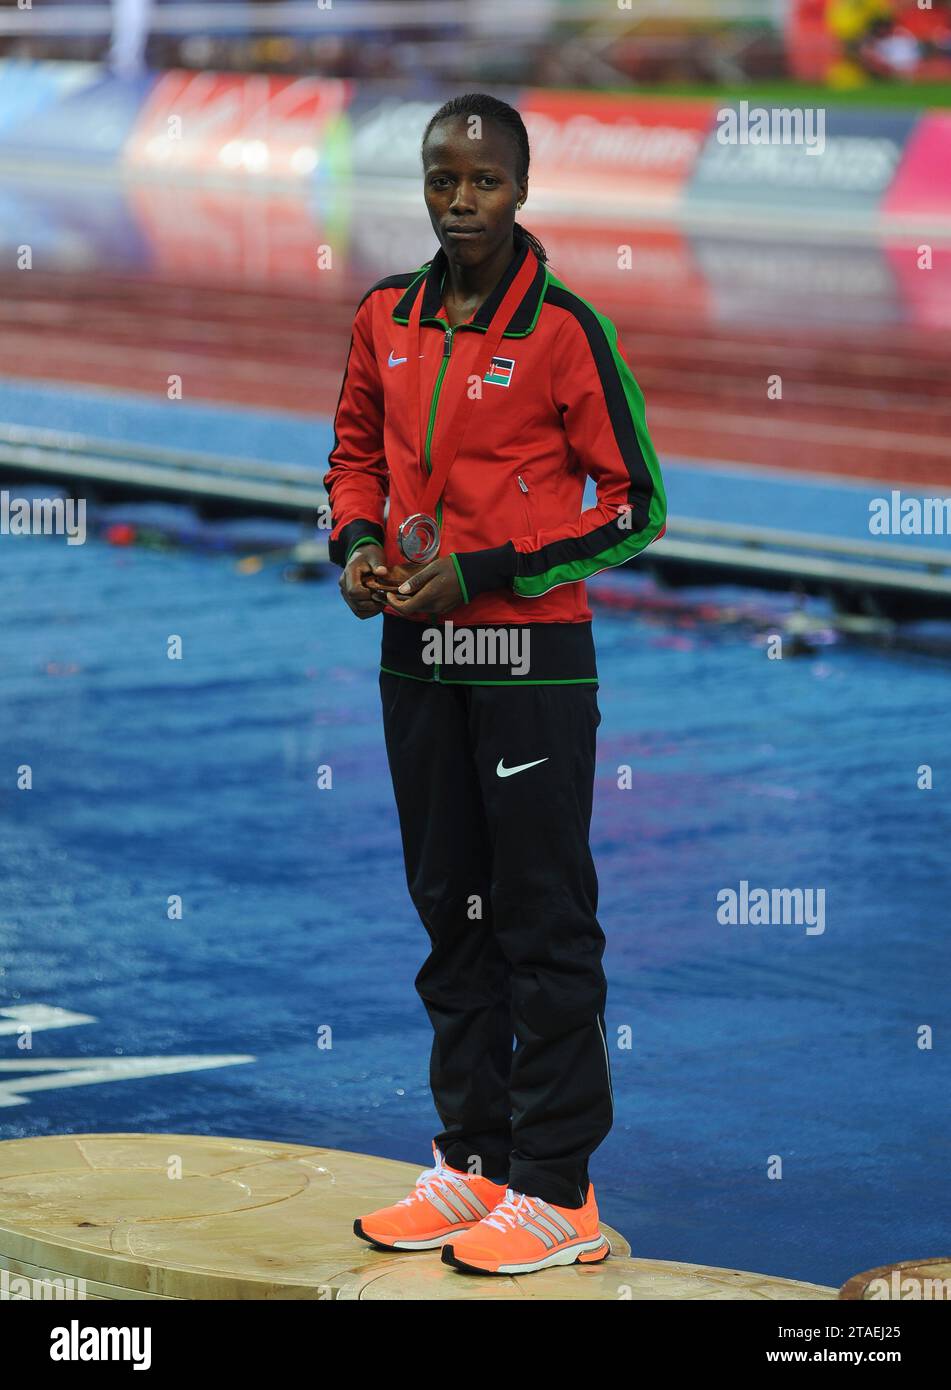 Janet Kisa of Kenya silver medal ceremony at the women’s 5000m at the Commonwealth Games, Glasgow, Scotland UK on the 27th Jul-2nd Aug 2014. Photo by Stock Photo